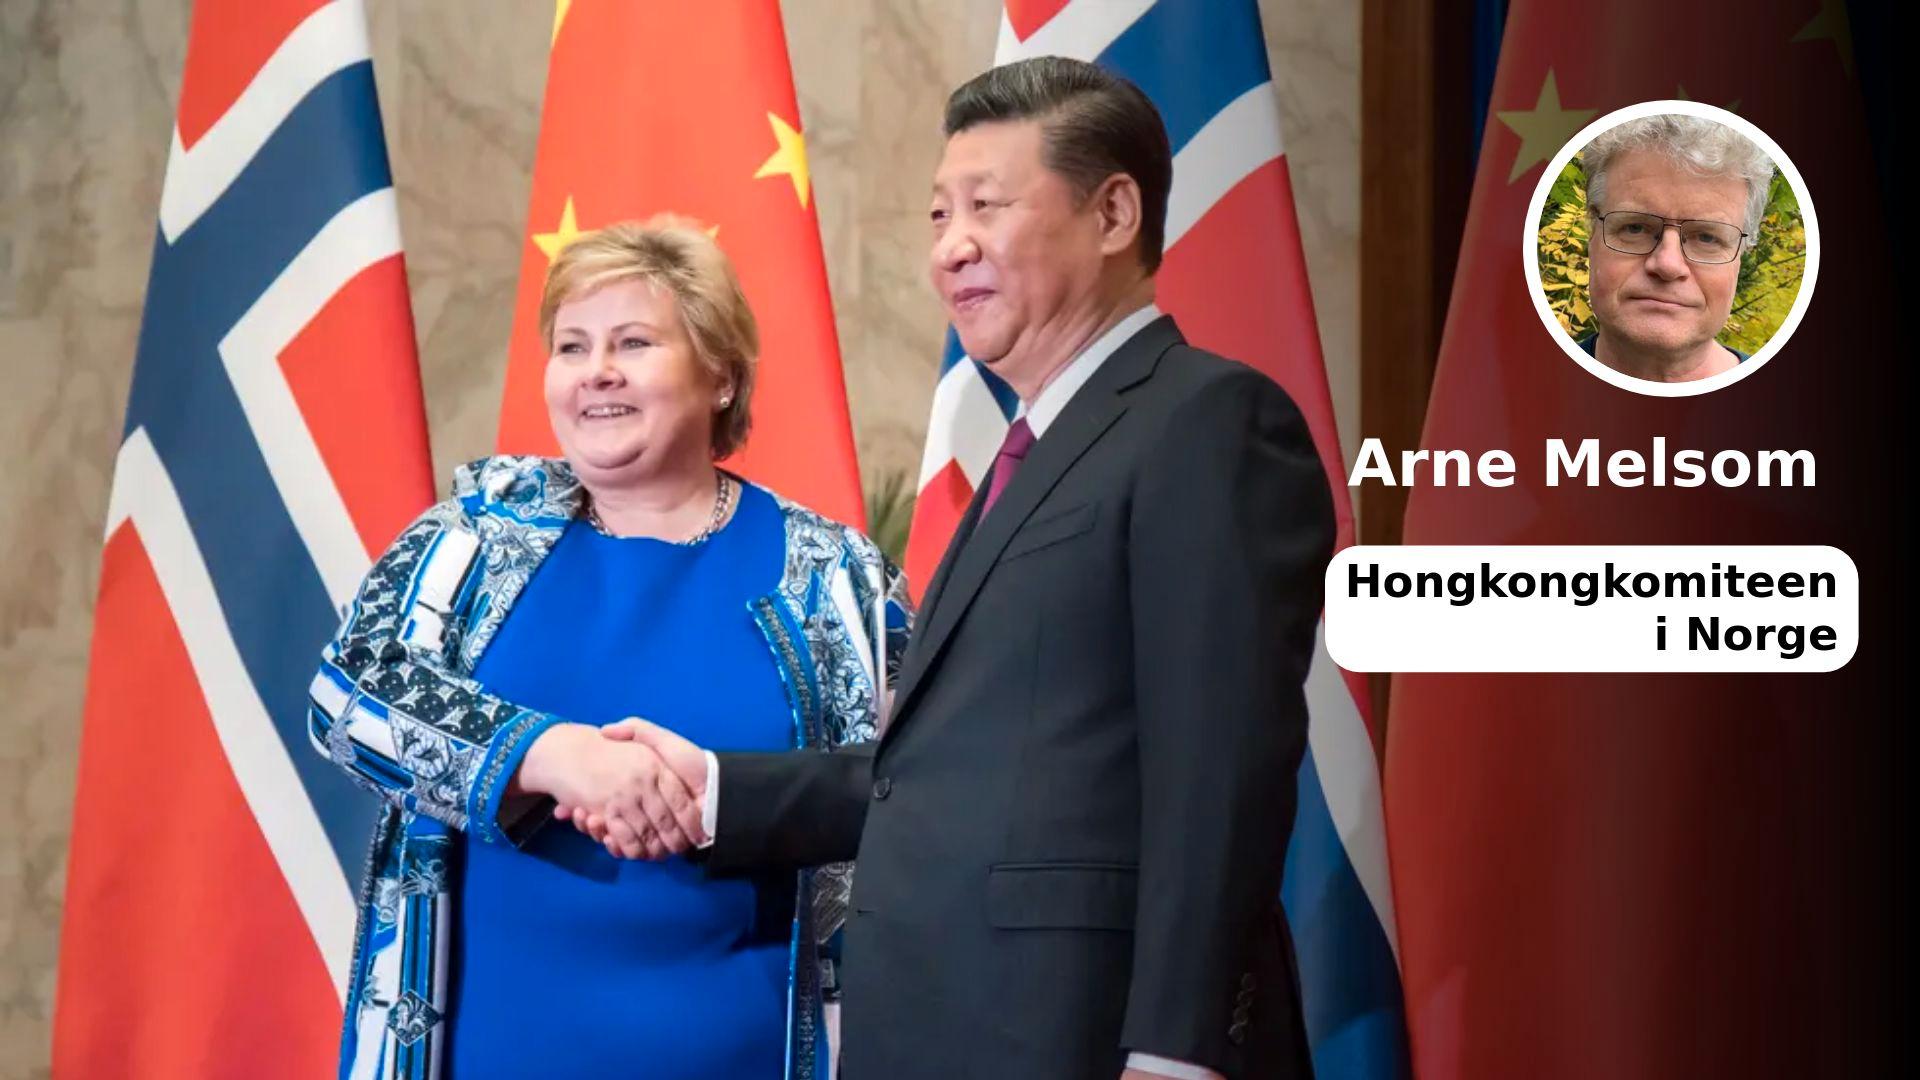 Normalization statement can no longer govern Norwegian policy in China